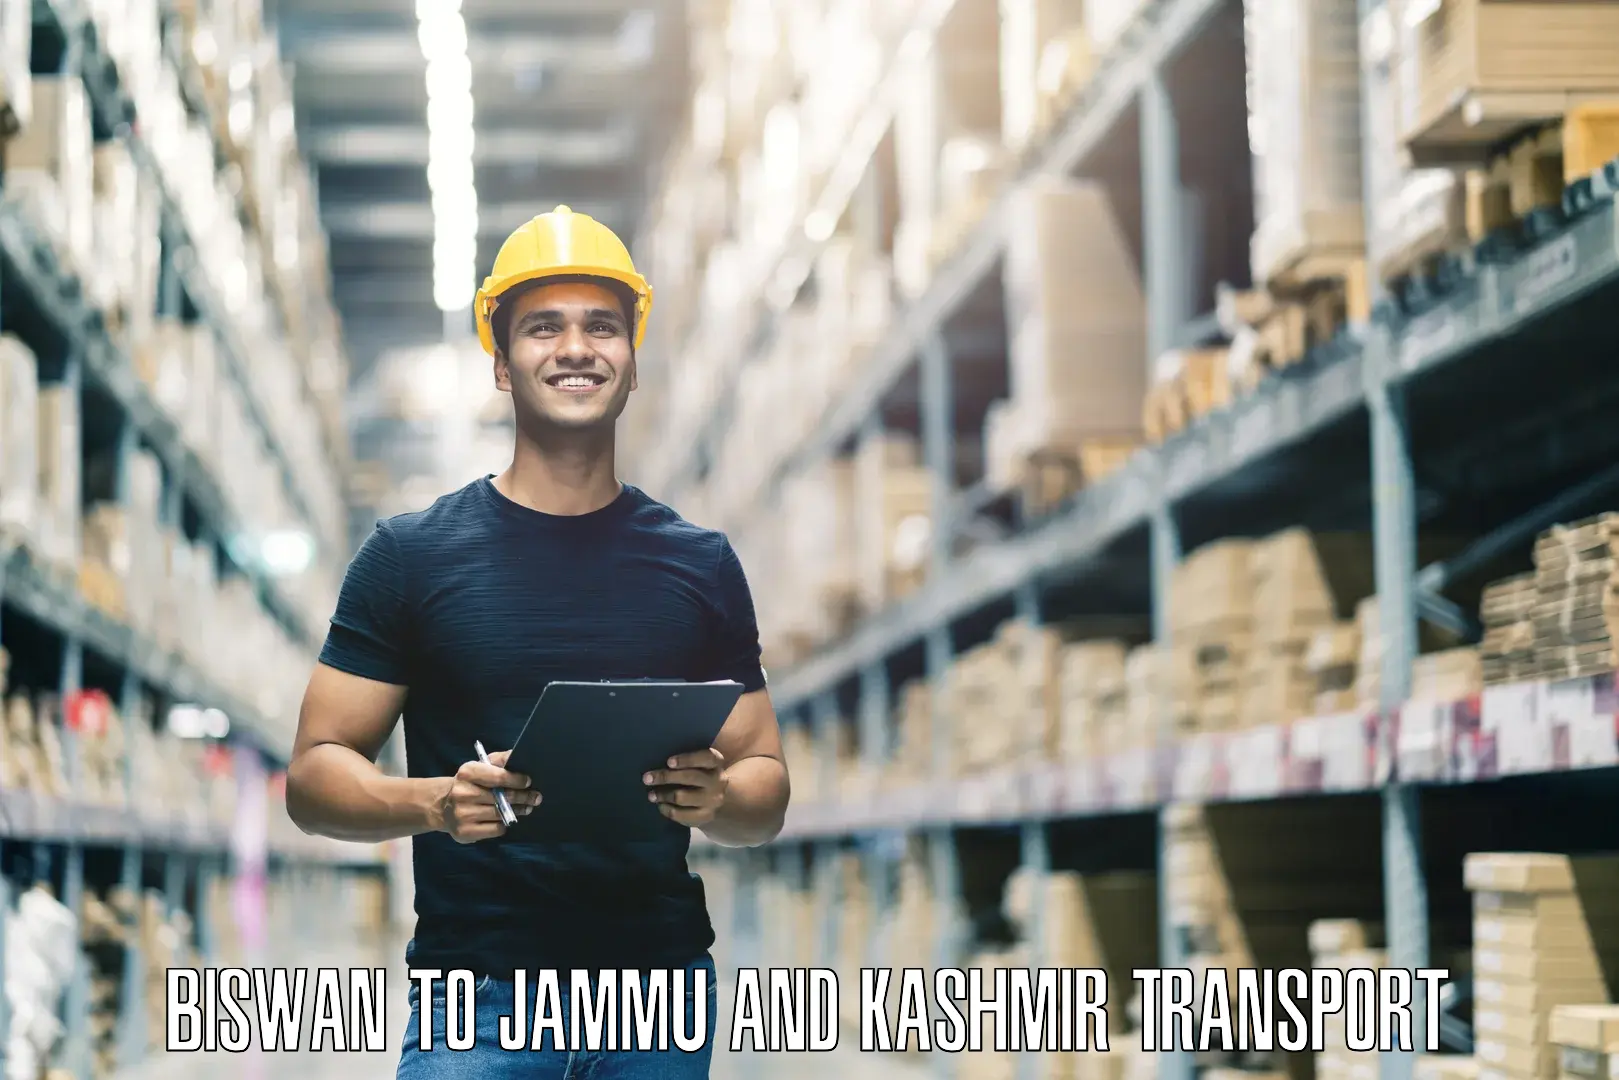 Truck transport companies in India Biswan to Jammu and Kashmir